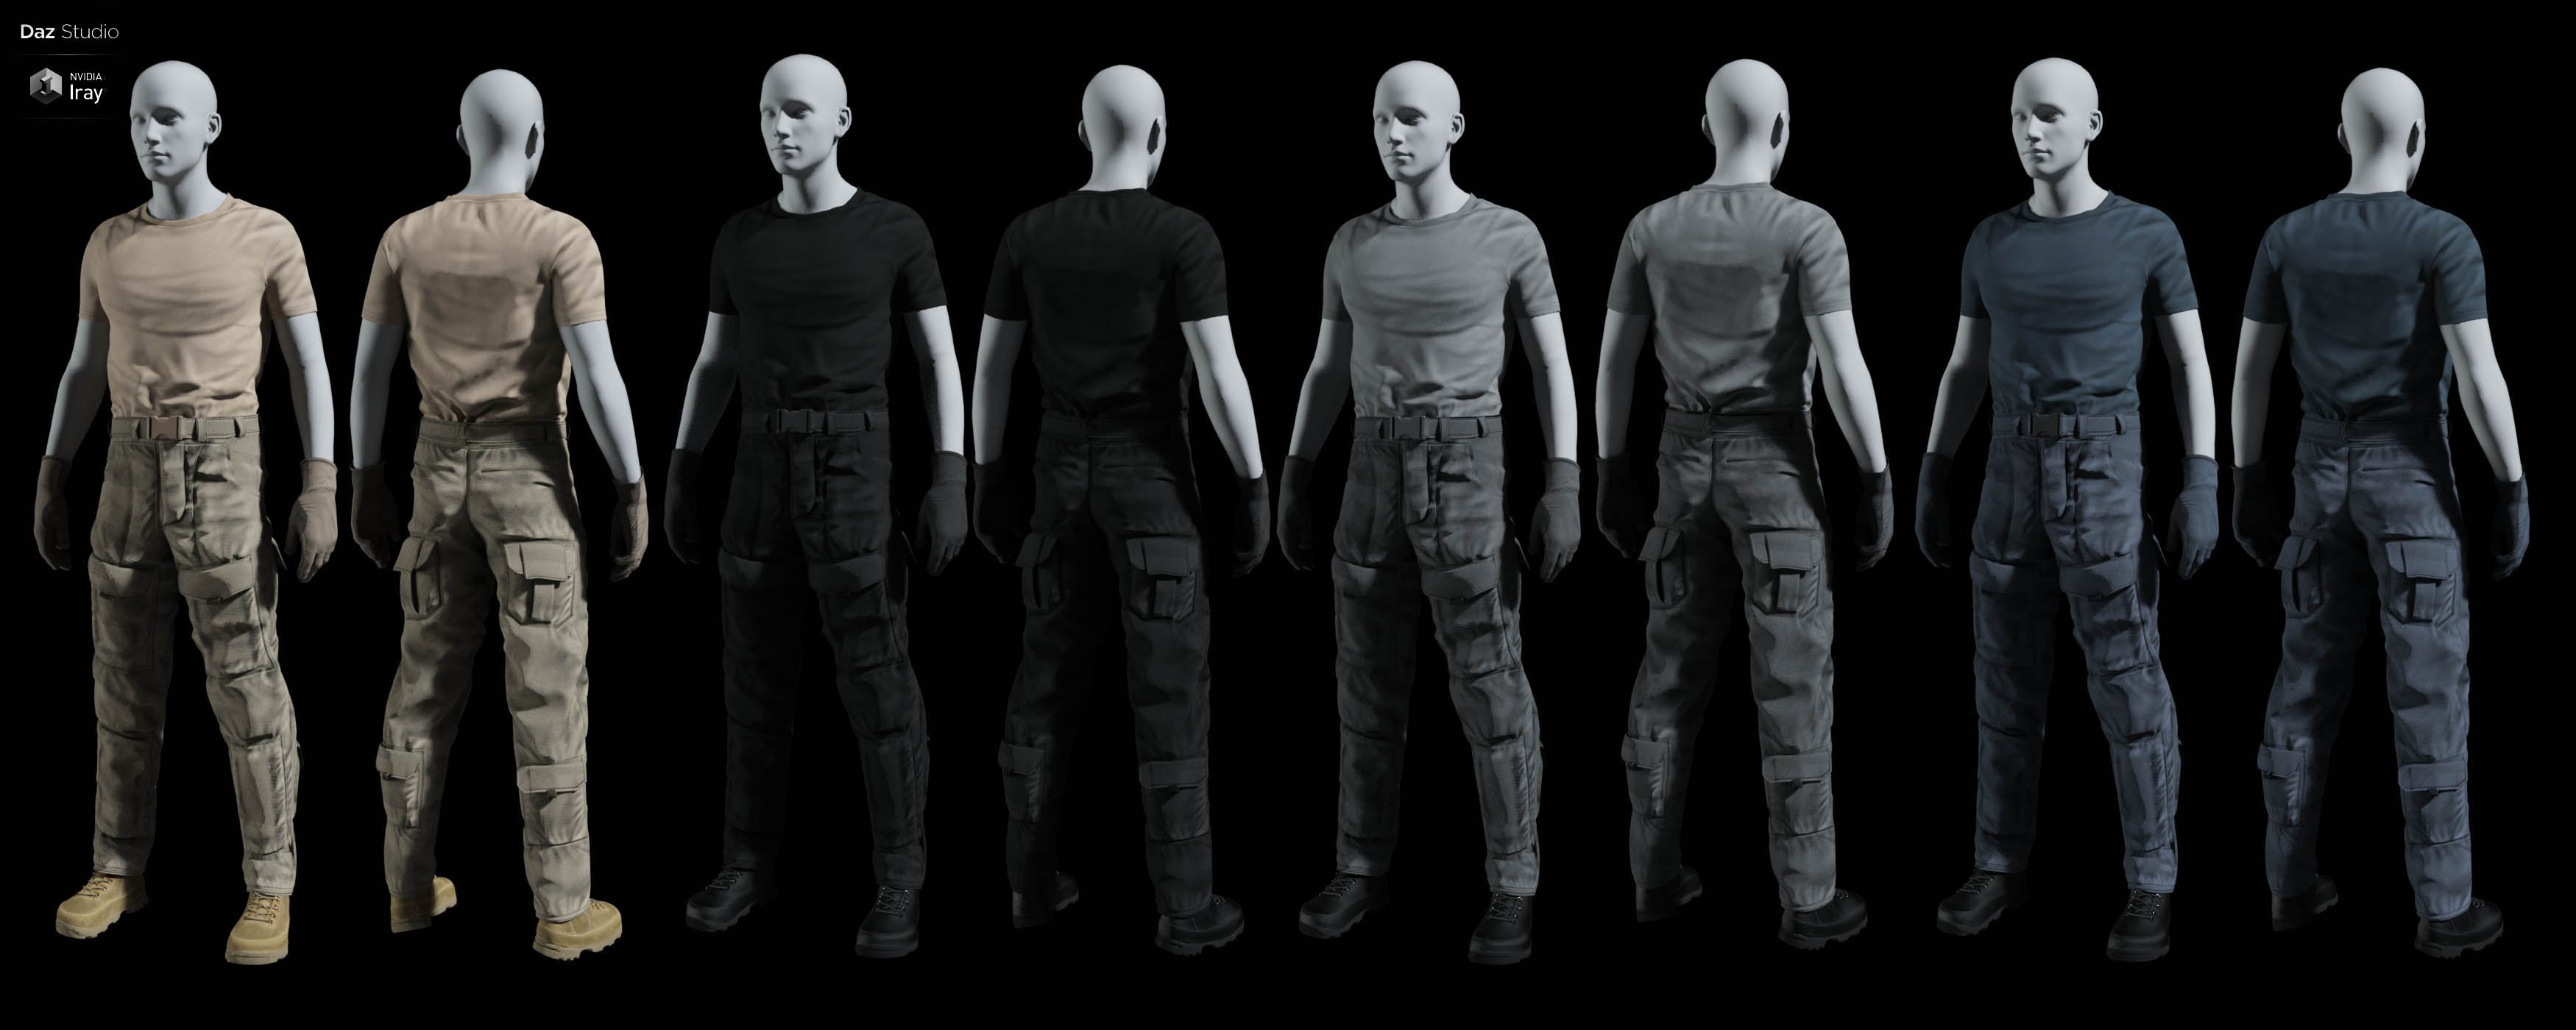 MI Tactical Outfit for Genesis 8 and 8.1 Males by: mal3Imagery, 3D Models by Daz 3D